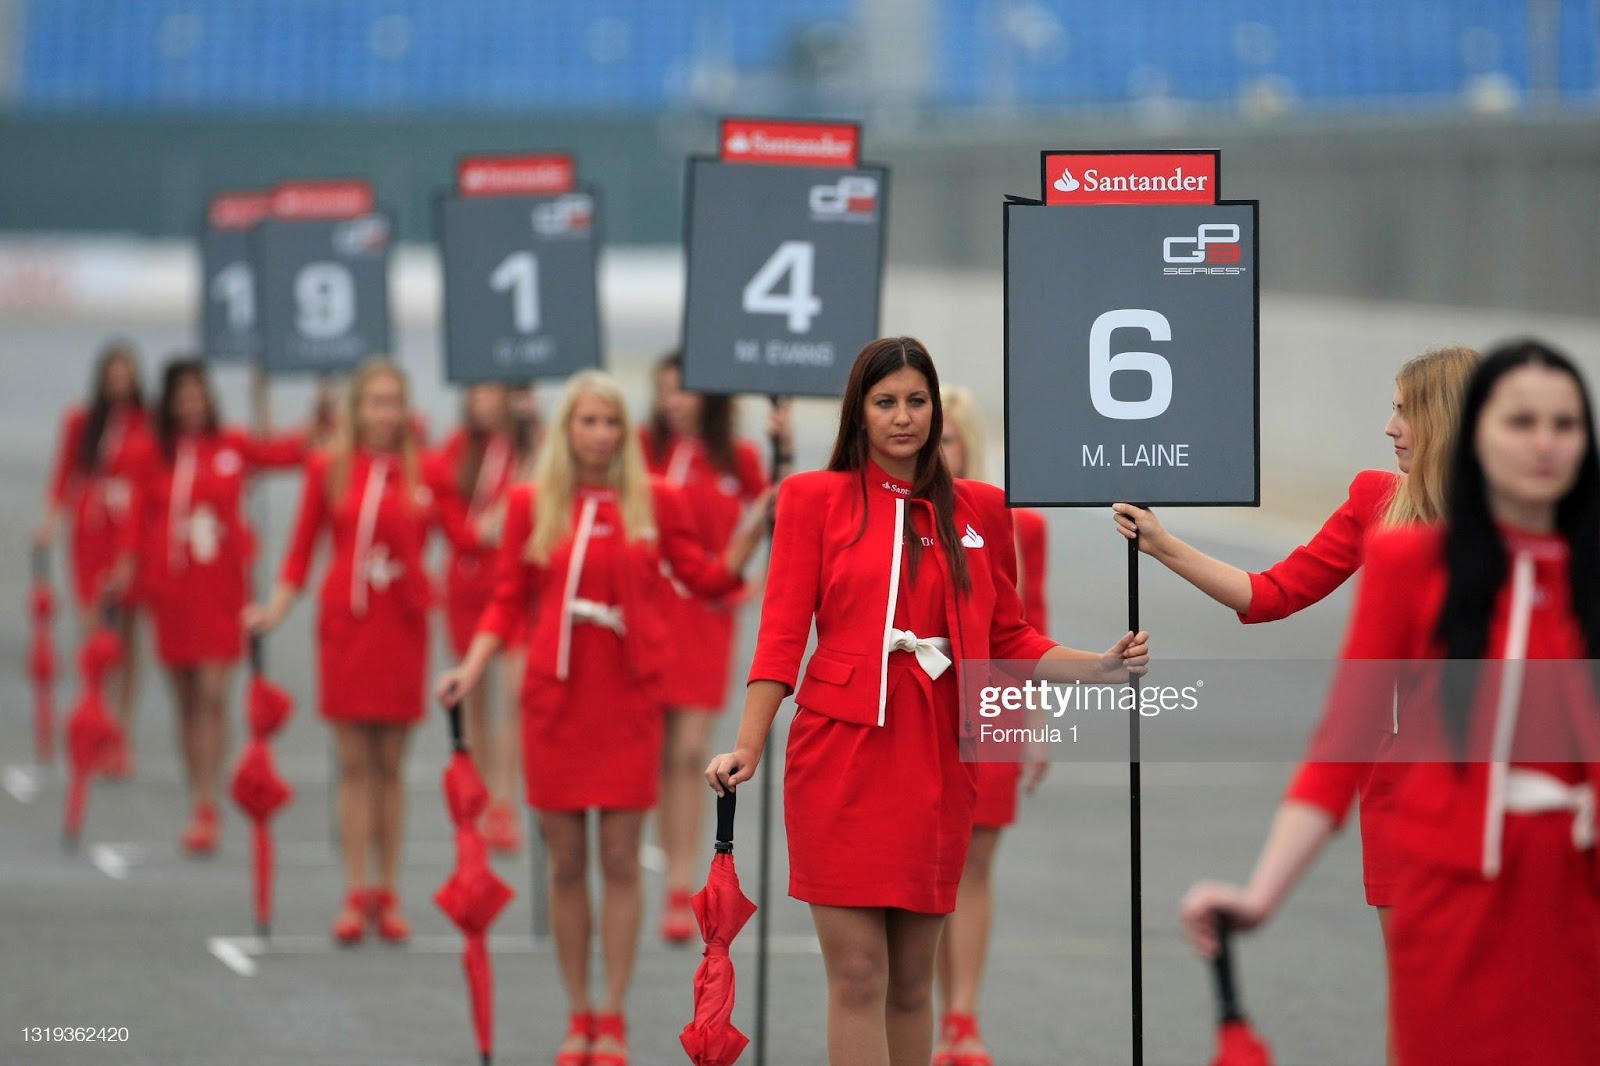 D:\Documenti\posts\posts\Women and motorsport\foto\Getty e altre\Silverstone\series-round-4brsilverstone-northamptonshire-england-8th-july-2012-picture-id1319362420.jpg